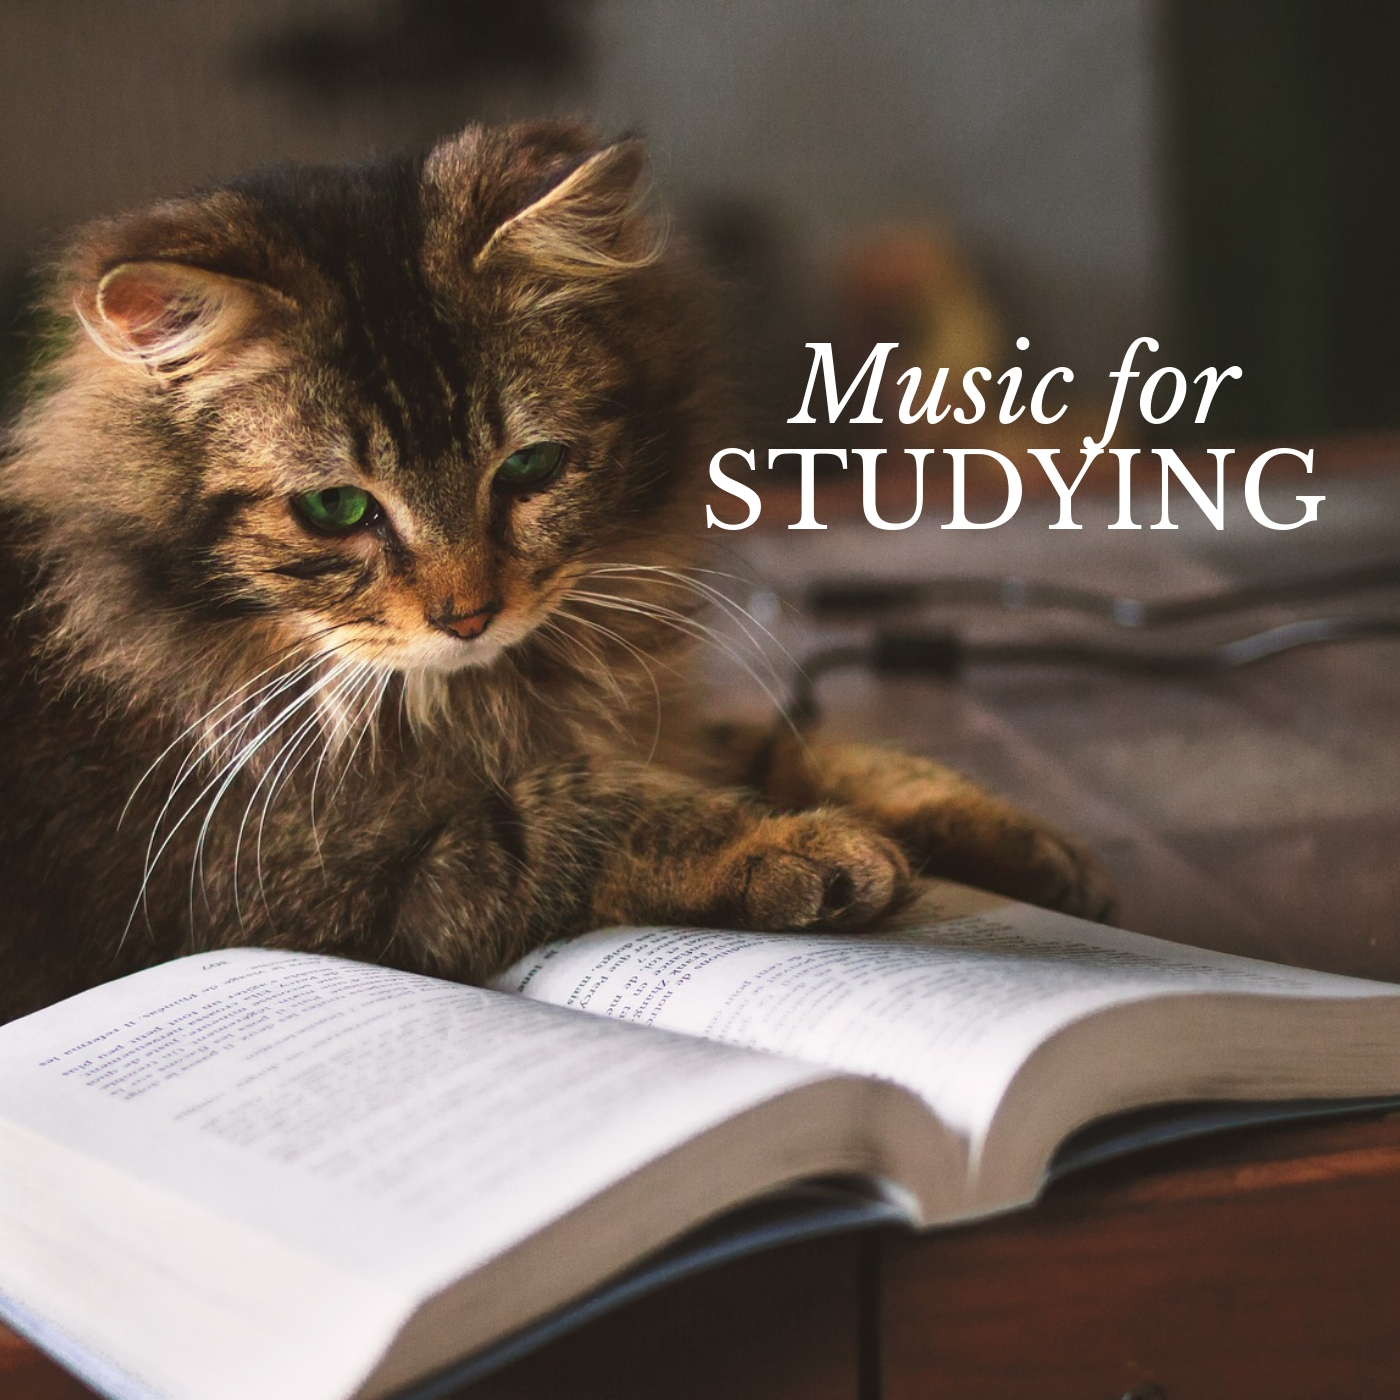 Classical Music for Studying & Brain Power